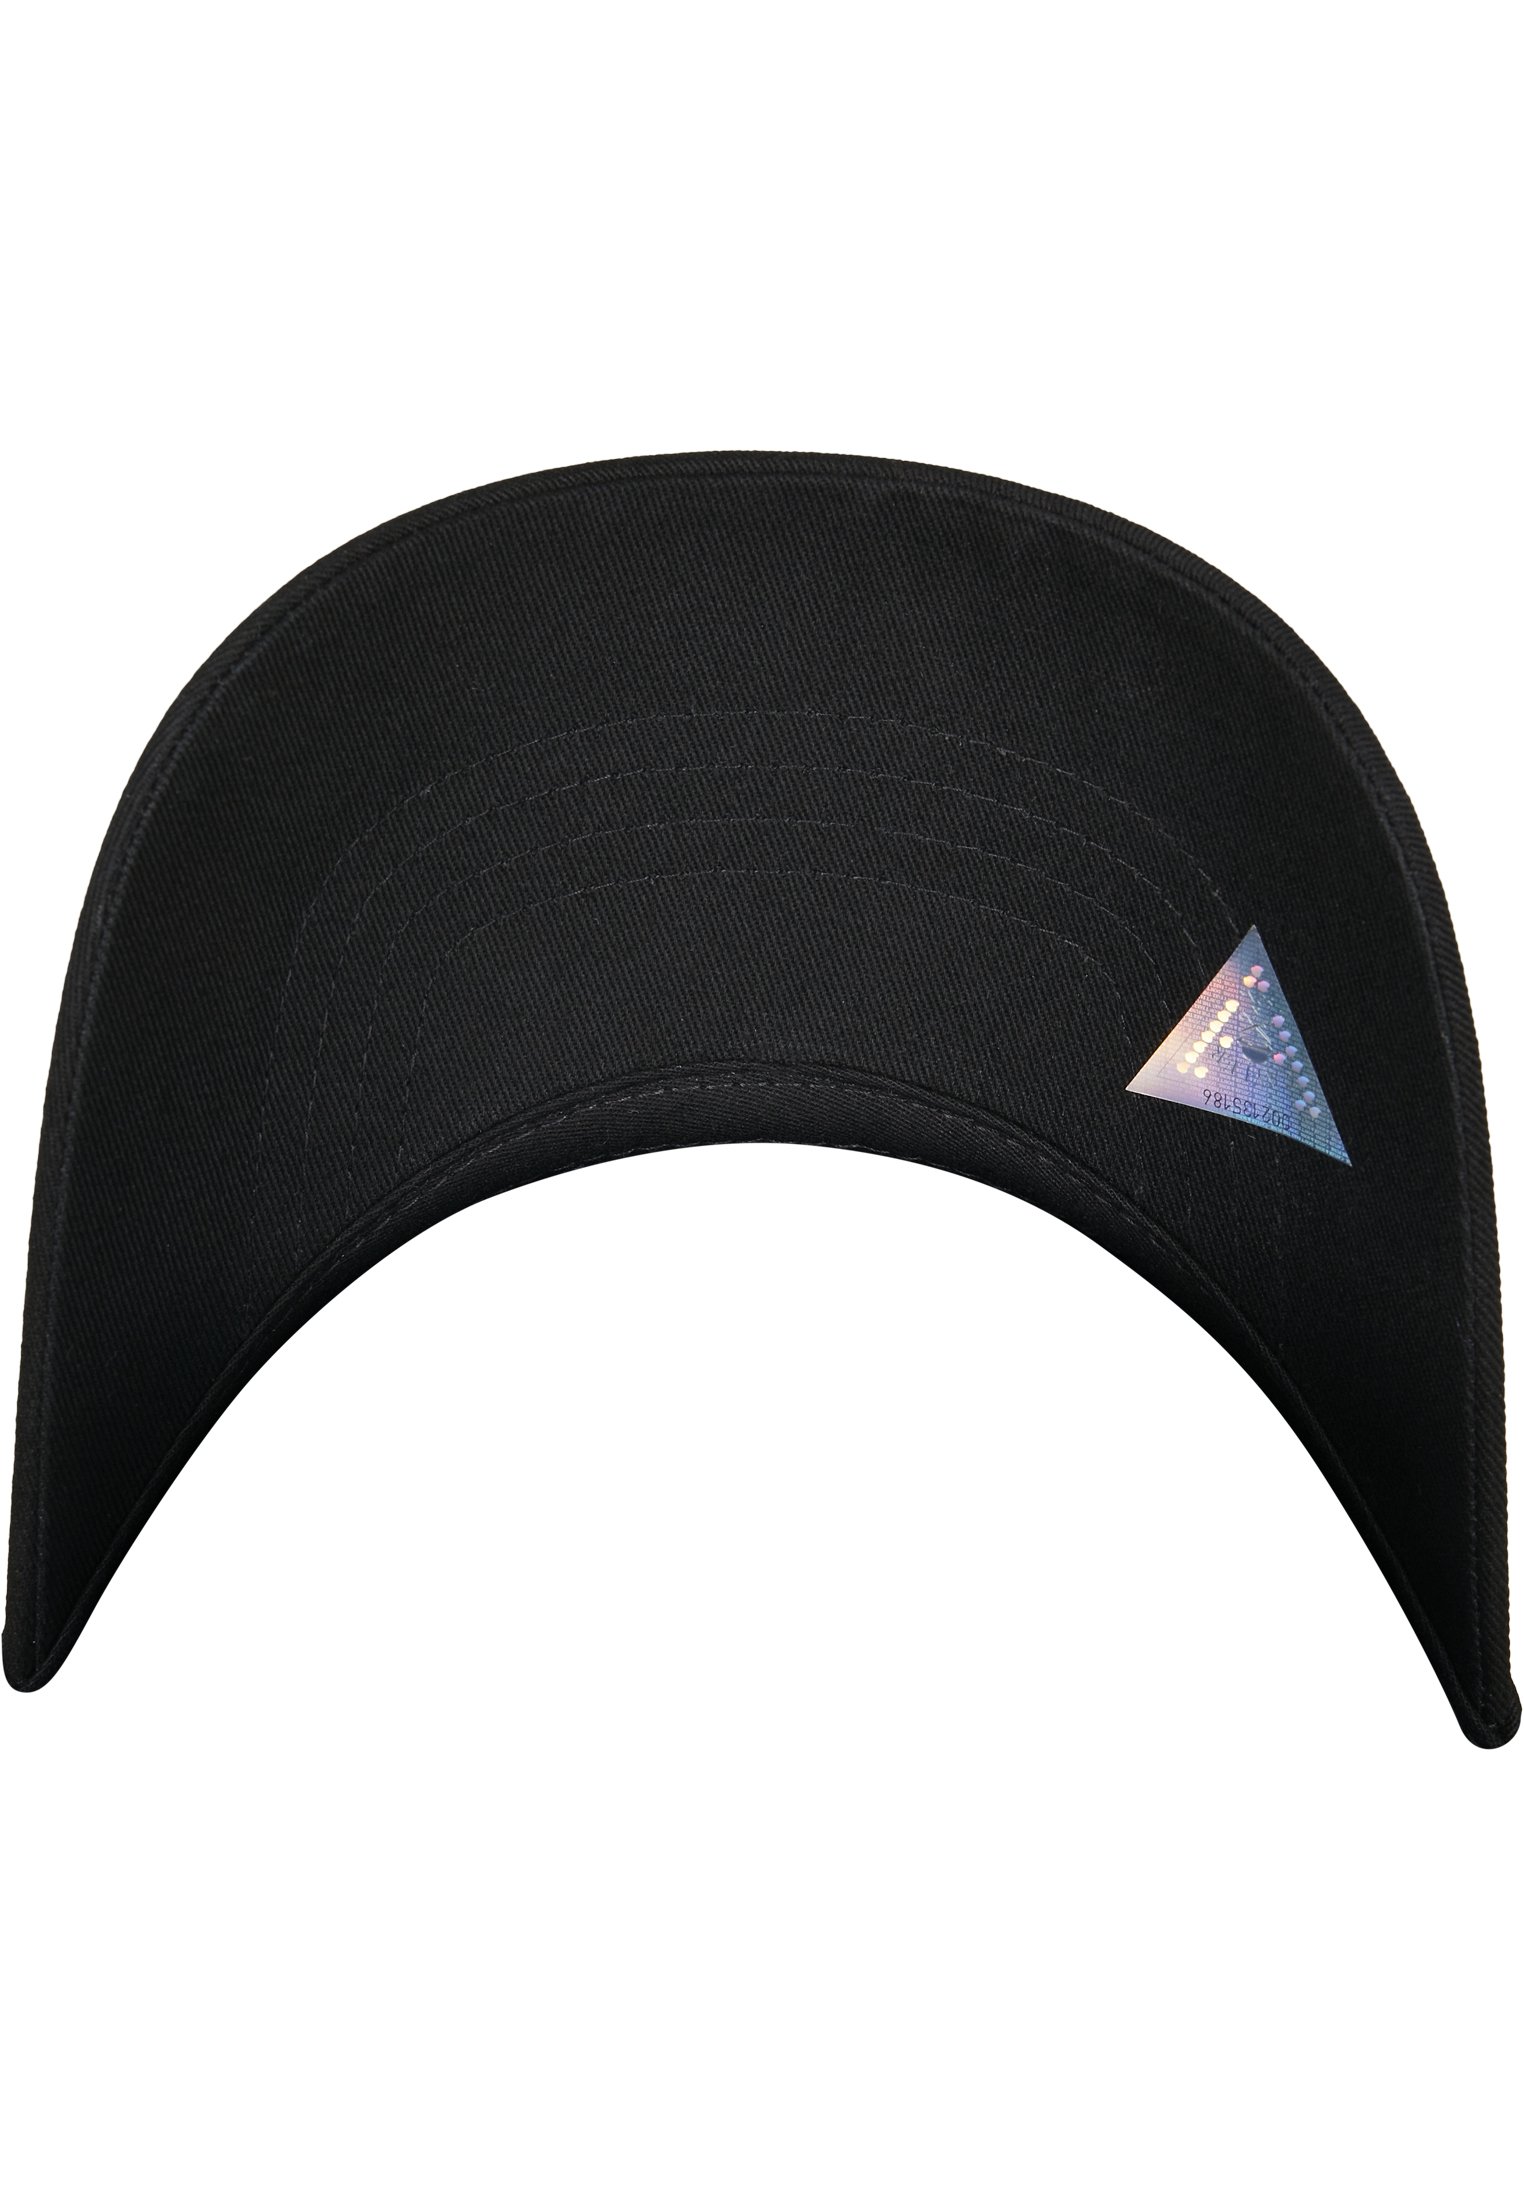 C&S WL Ride Or Fly Curved Cap black/mc one size